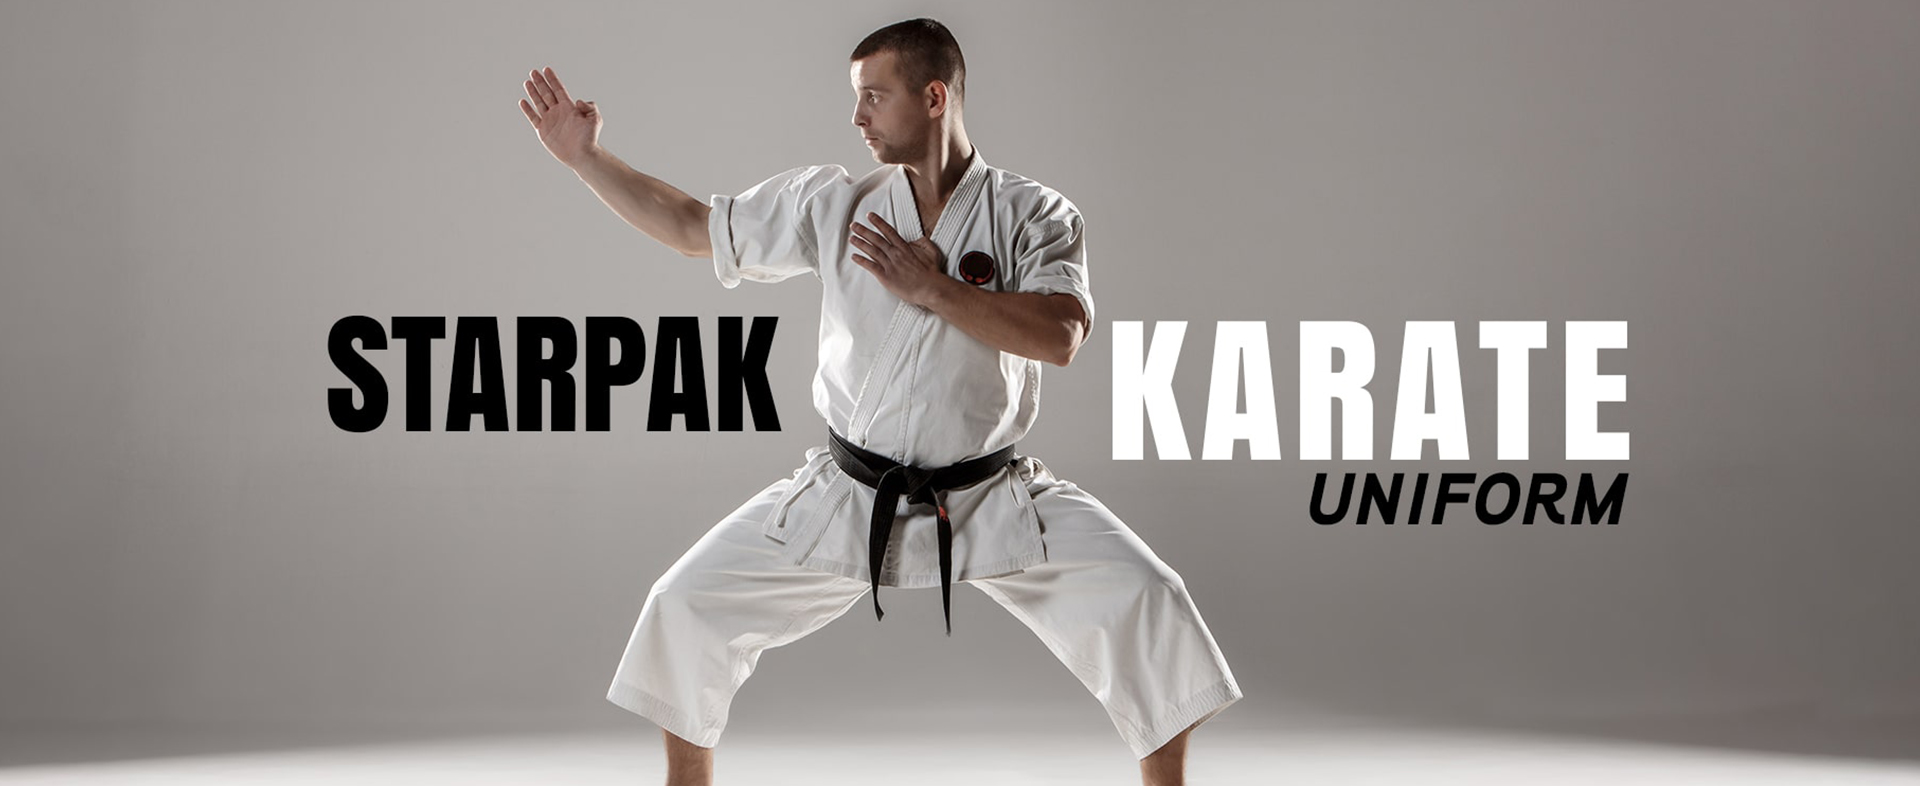 karate-unifrom-manufacturer